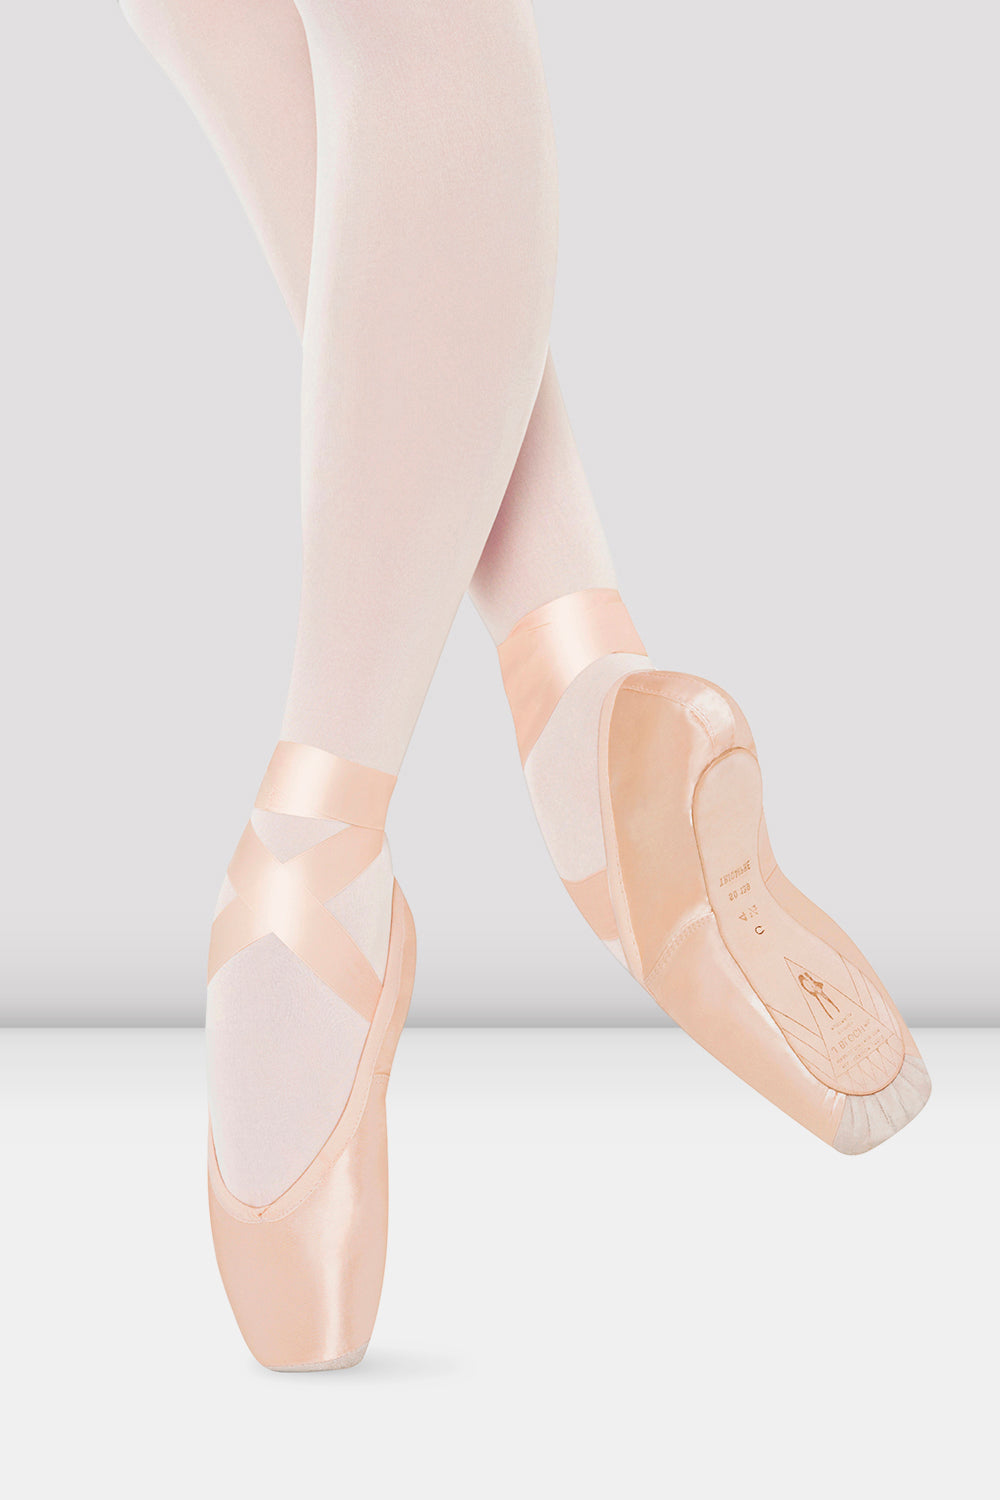 BLOCH Triomphe Suede Toe Cap Pointe Shoes, Pink Satin